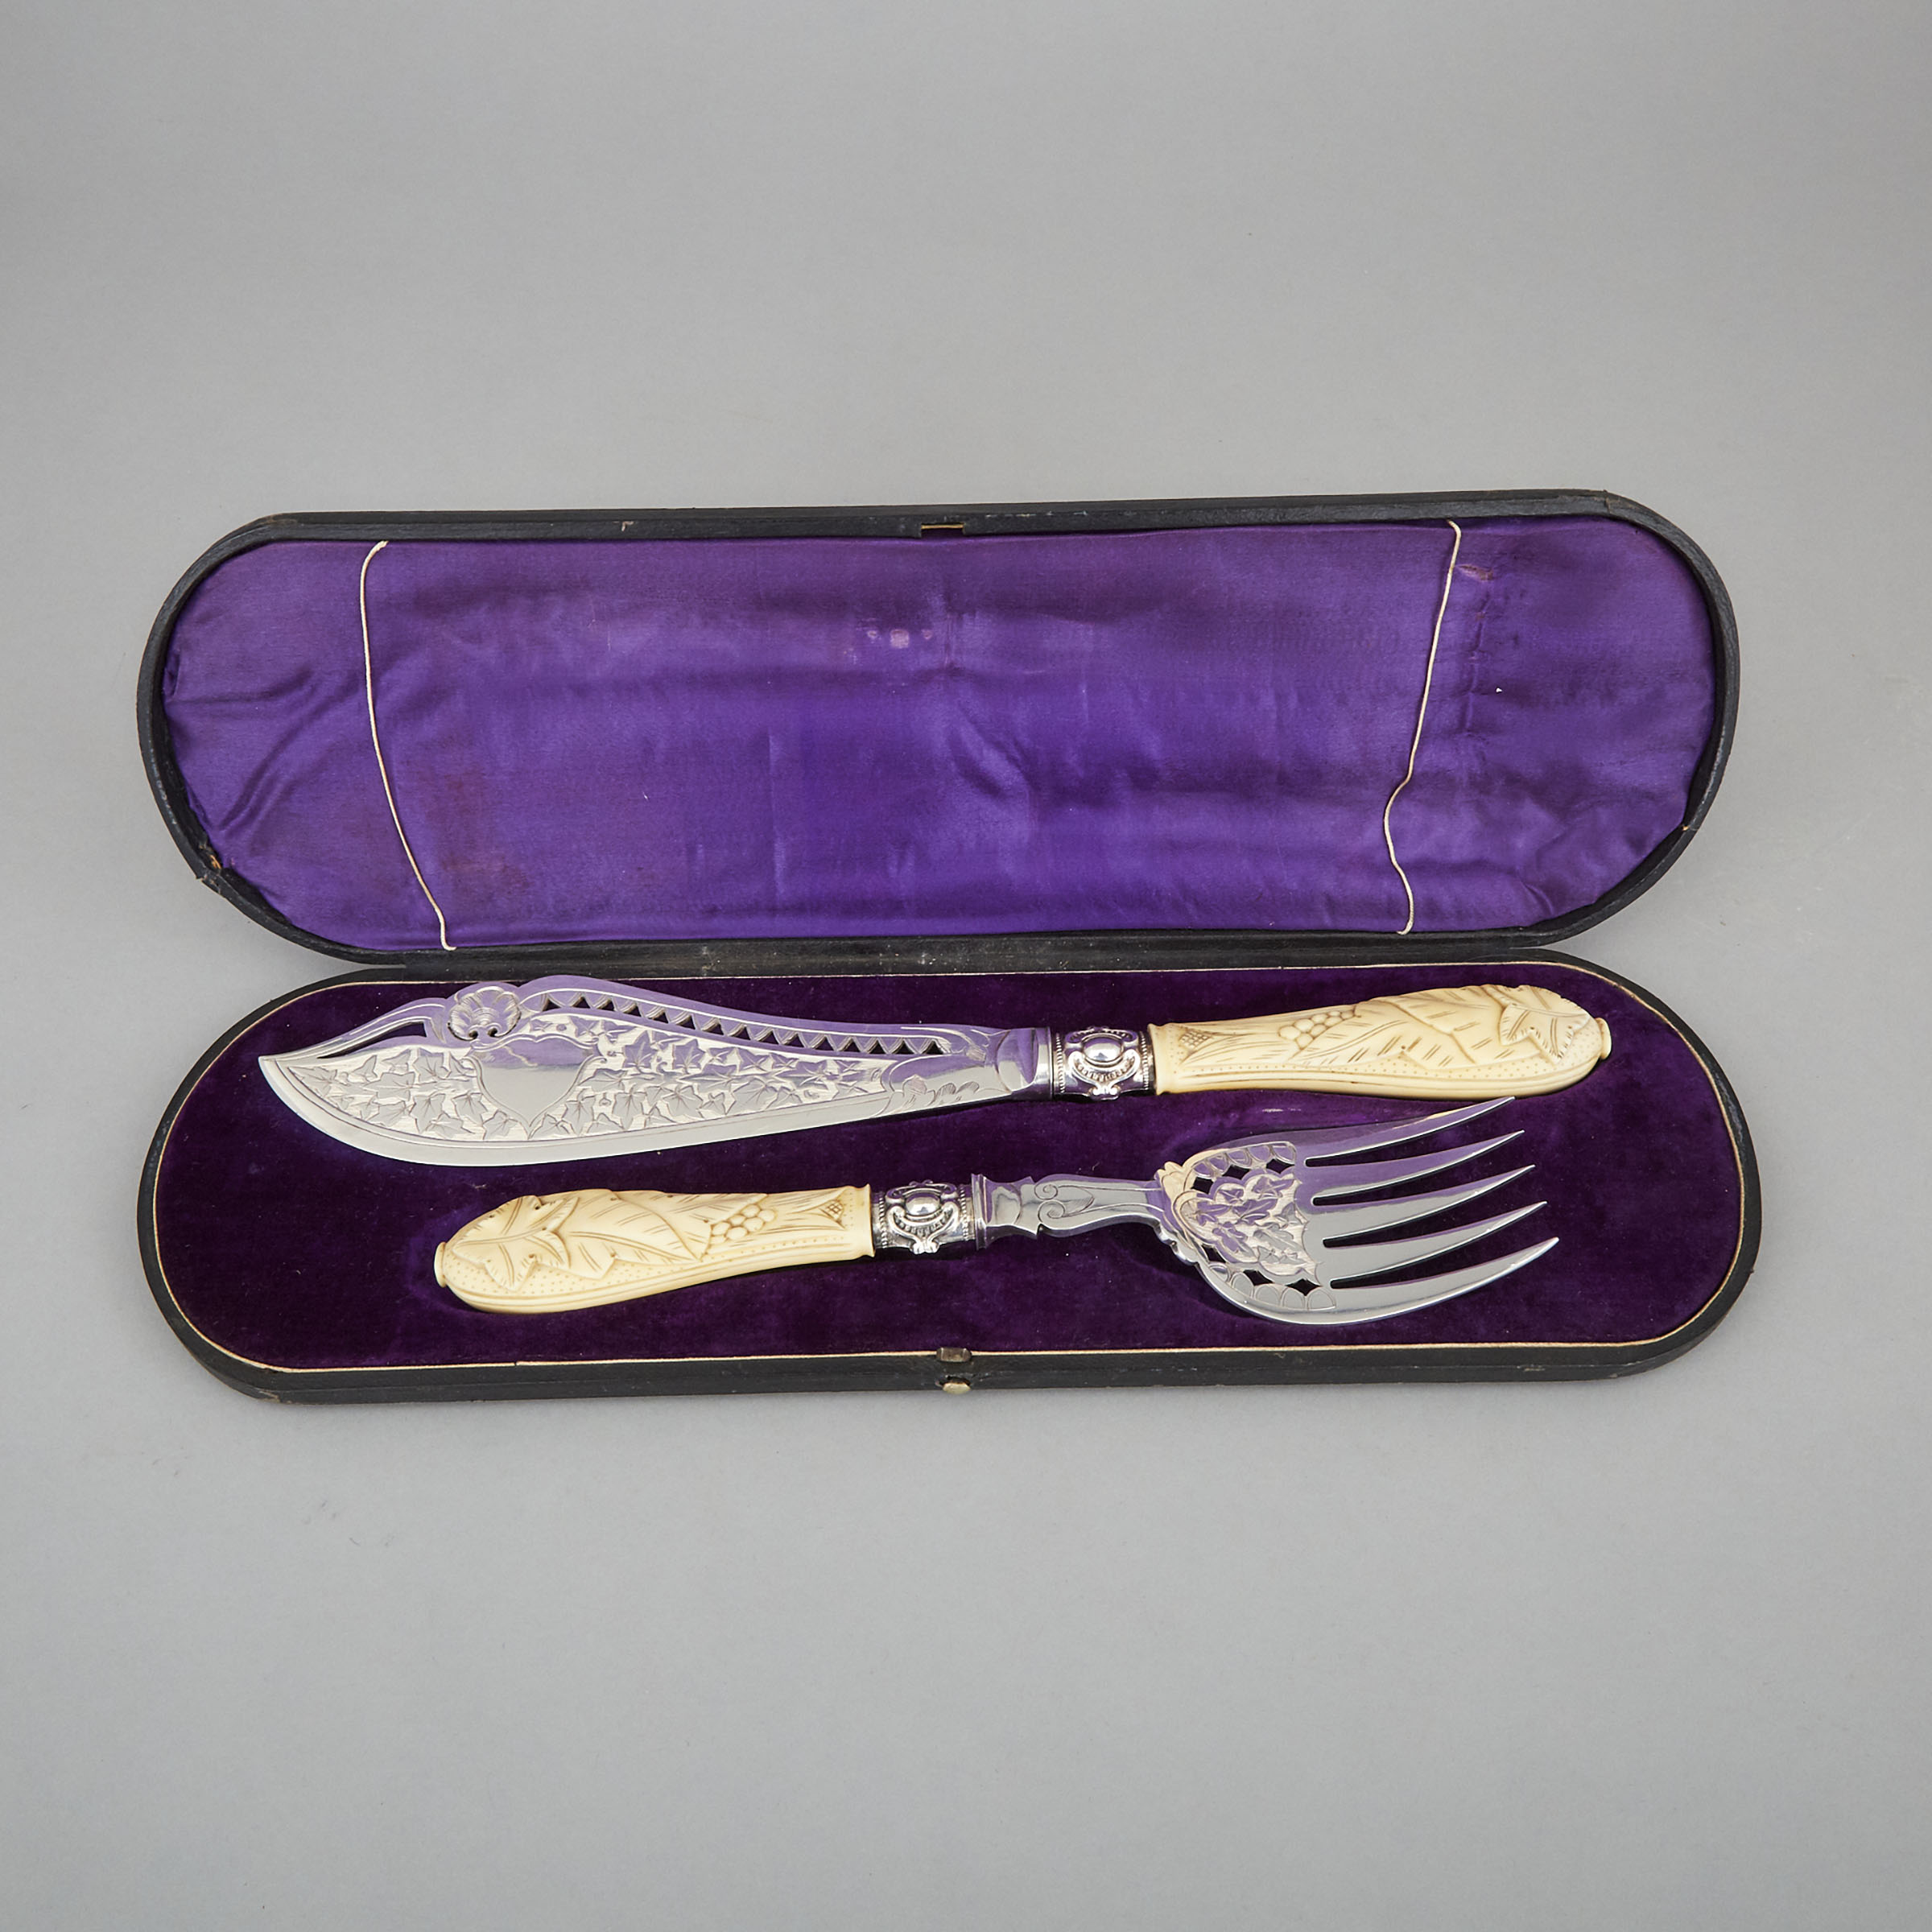 Pair of Victorian Silver Plated Fish Servers, mid-19th century